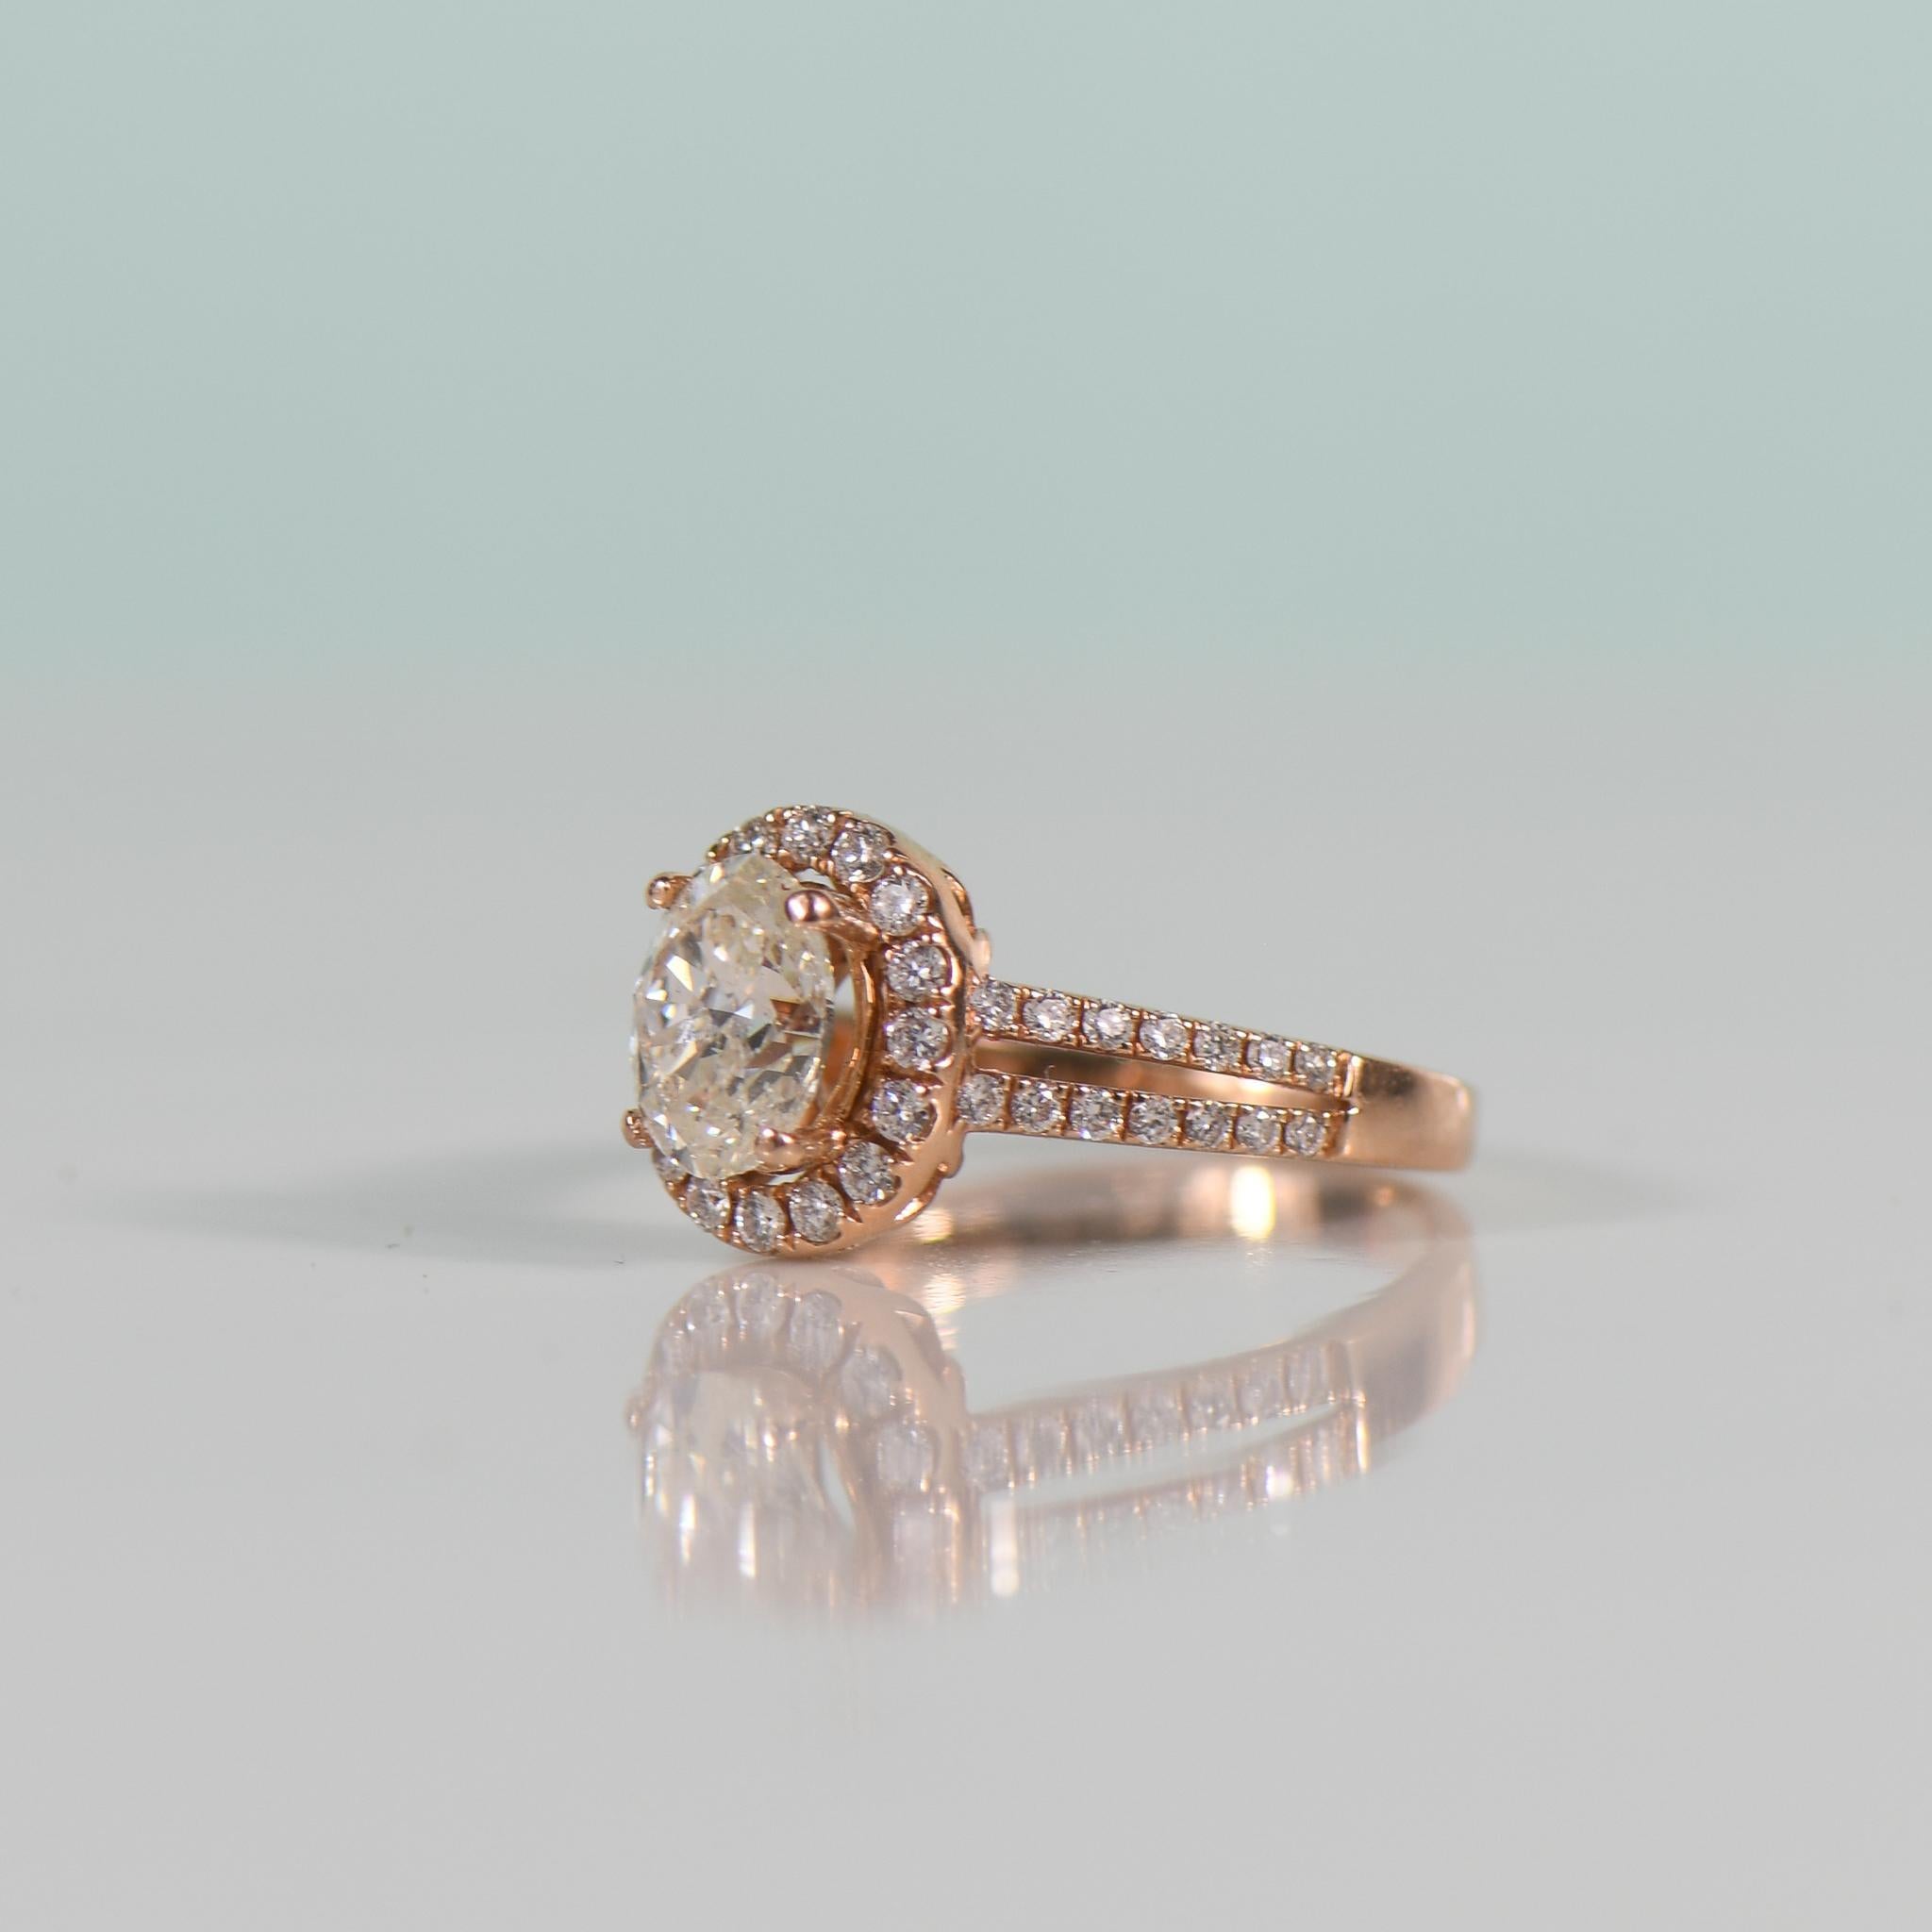 Indulge in the exquisite beauty of this enchanting ring, featuring a dazzling 1.50 carat oval GIA-certified natural diamond embraced by a halo of shimmering diamonds, all set in lustrous rose gold. The split shank design adds a touch of contemporary